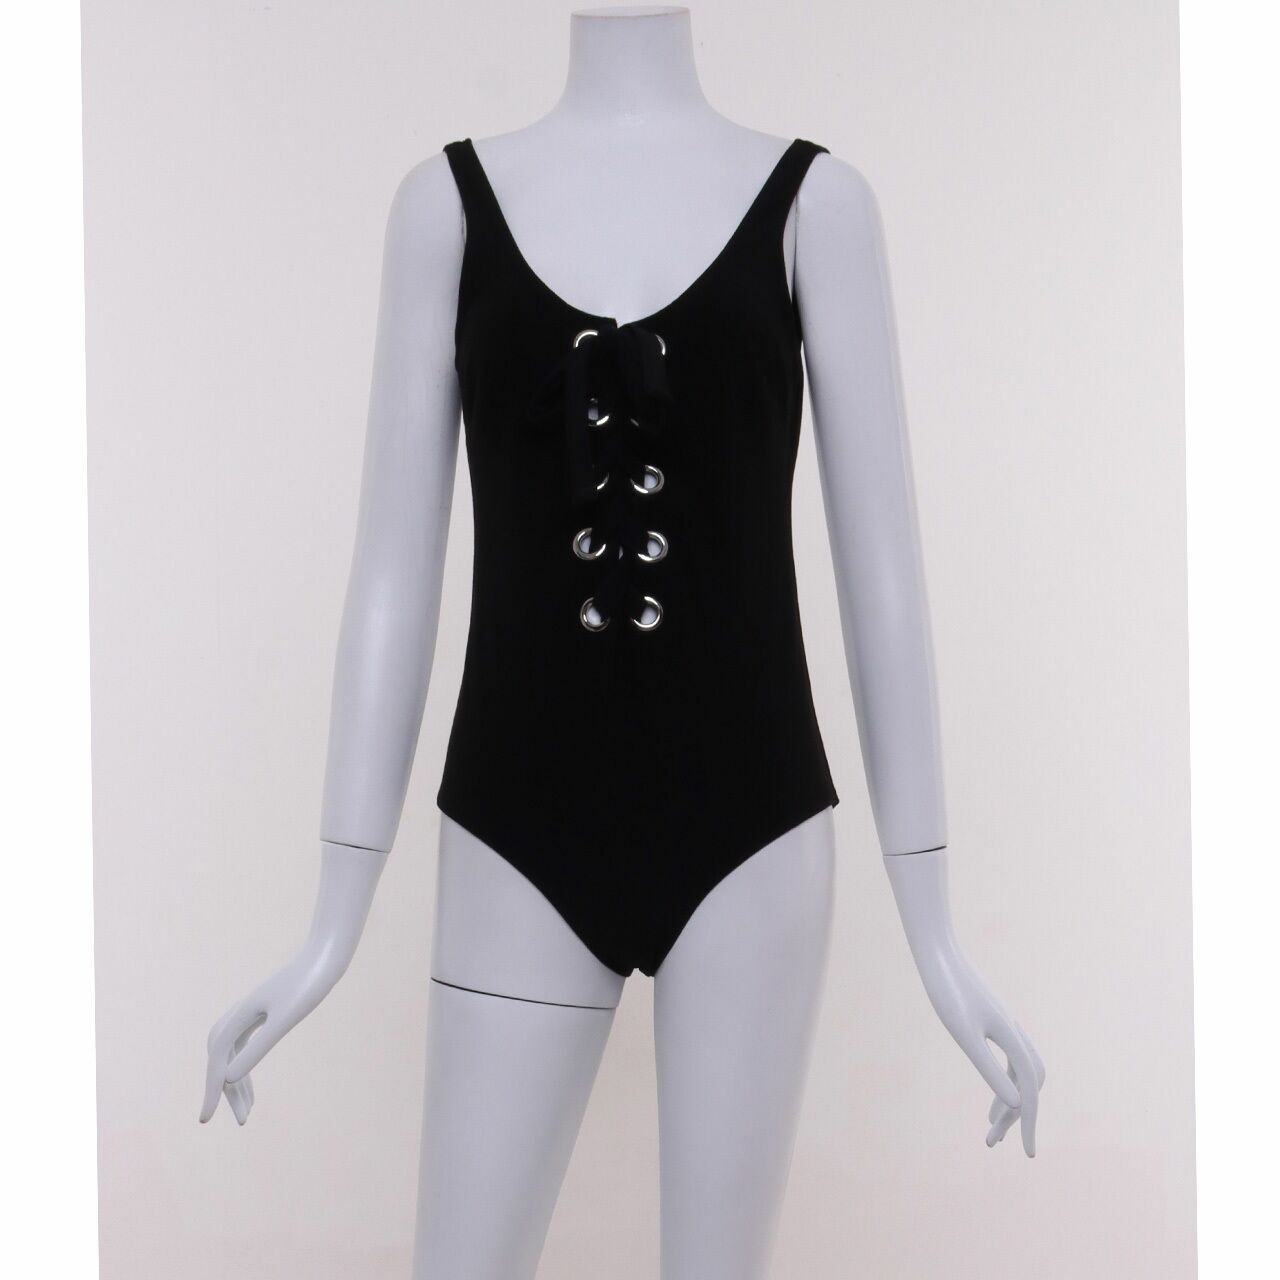 & Other Stories Black One Piece